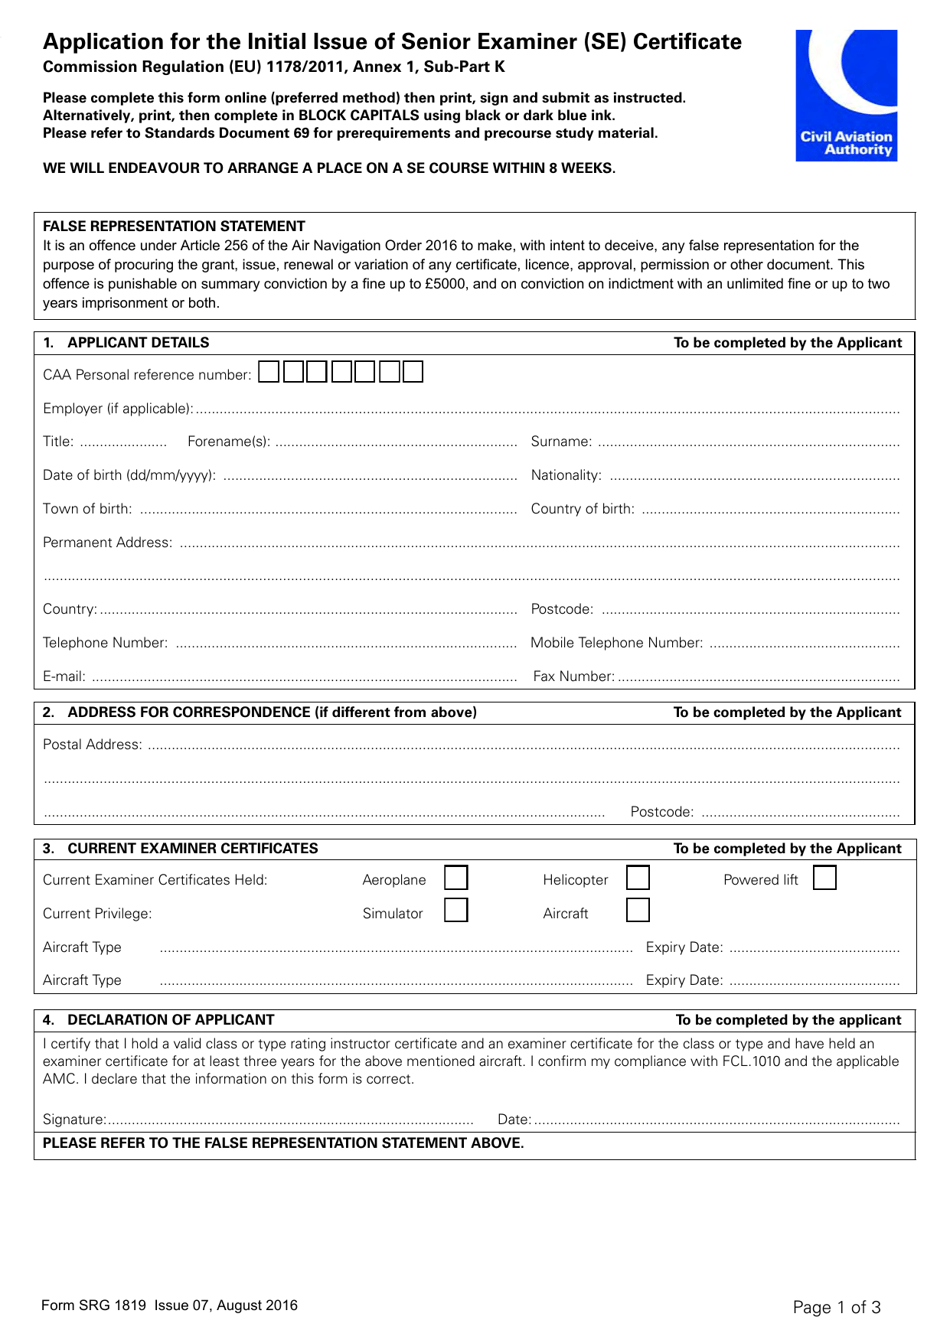 Form SRG1819 Application for the Initial Issue of Senior Examiner (Se) Certificate - United Kingdom, Page 1